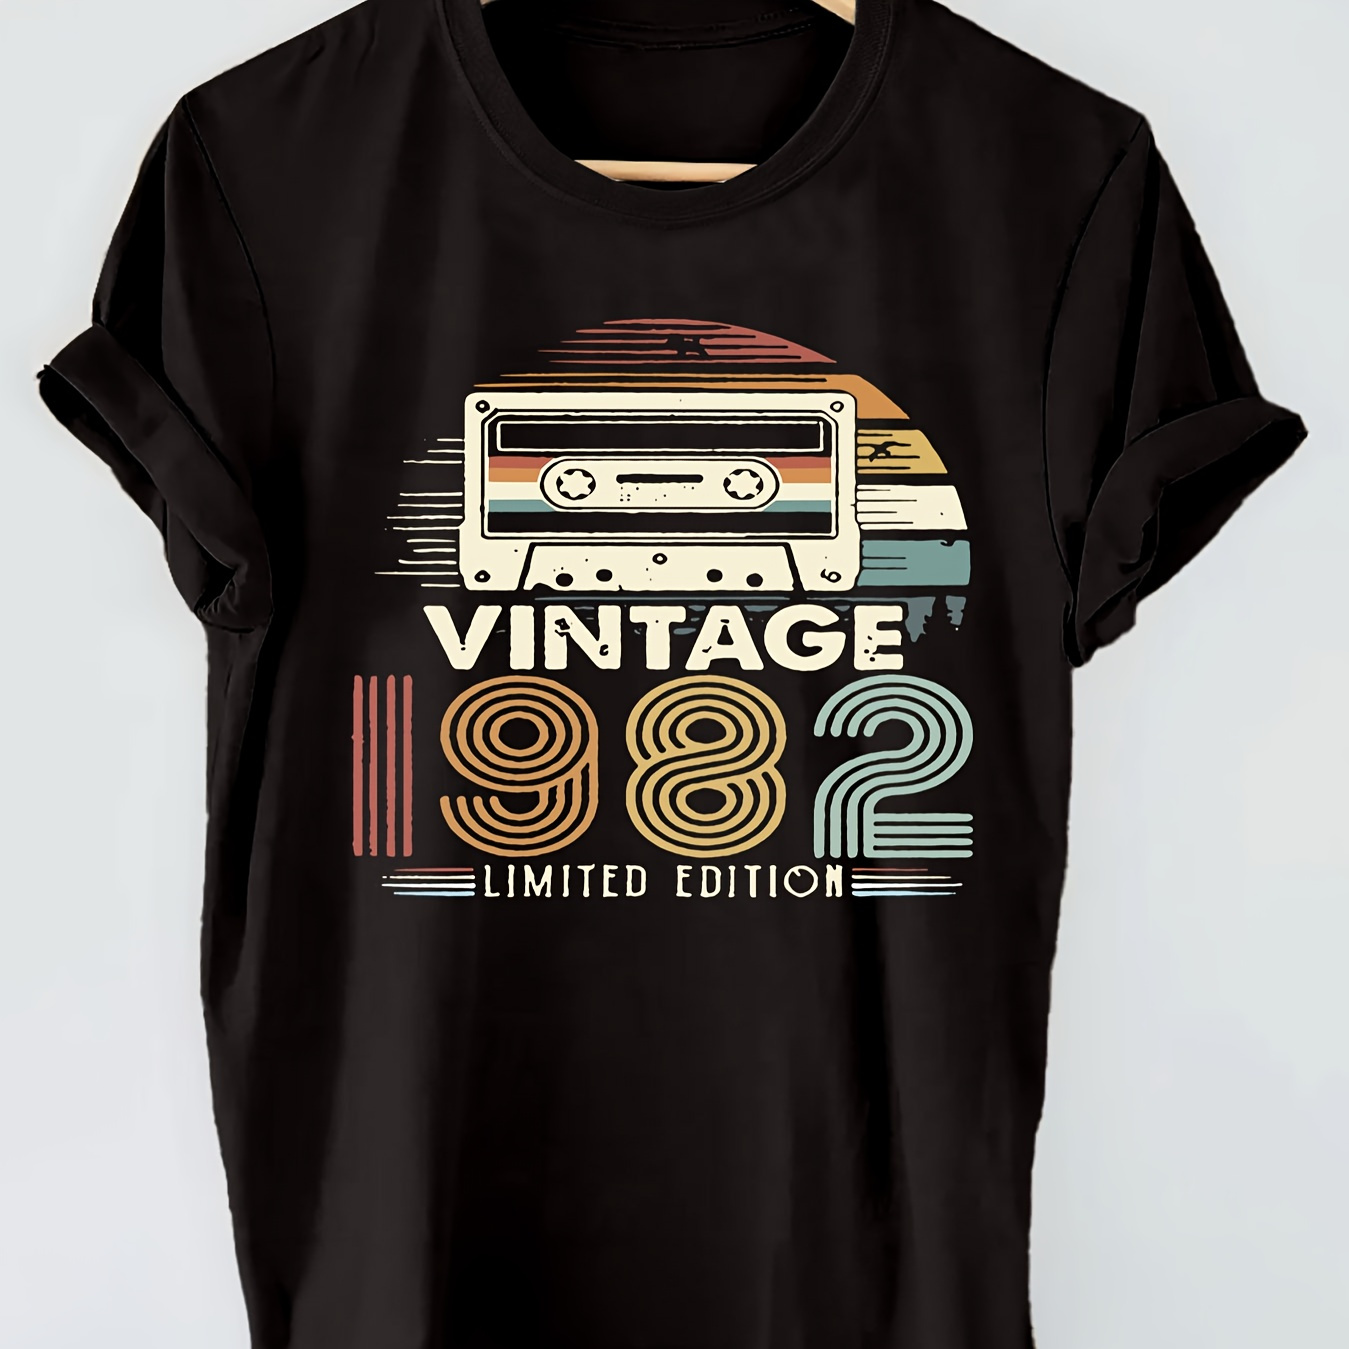 

Vintage 1982 Limited Edition Print T-shirt, Short Sleeve Crew Neck Casual Top For Summer & Spring, Women's Clothing